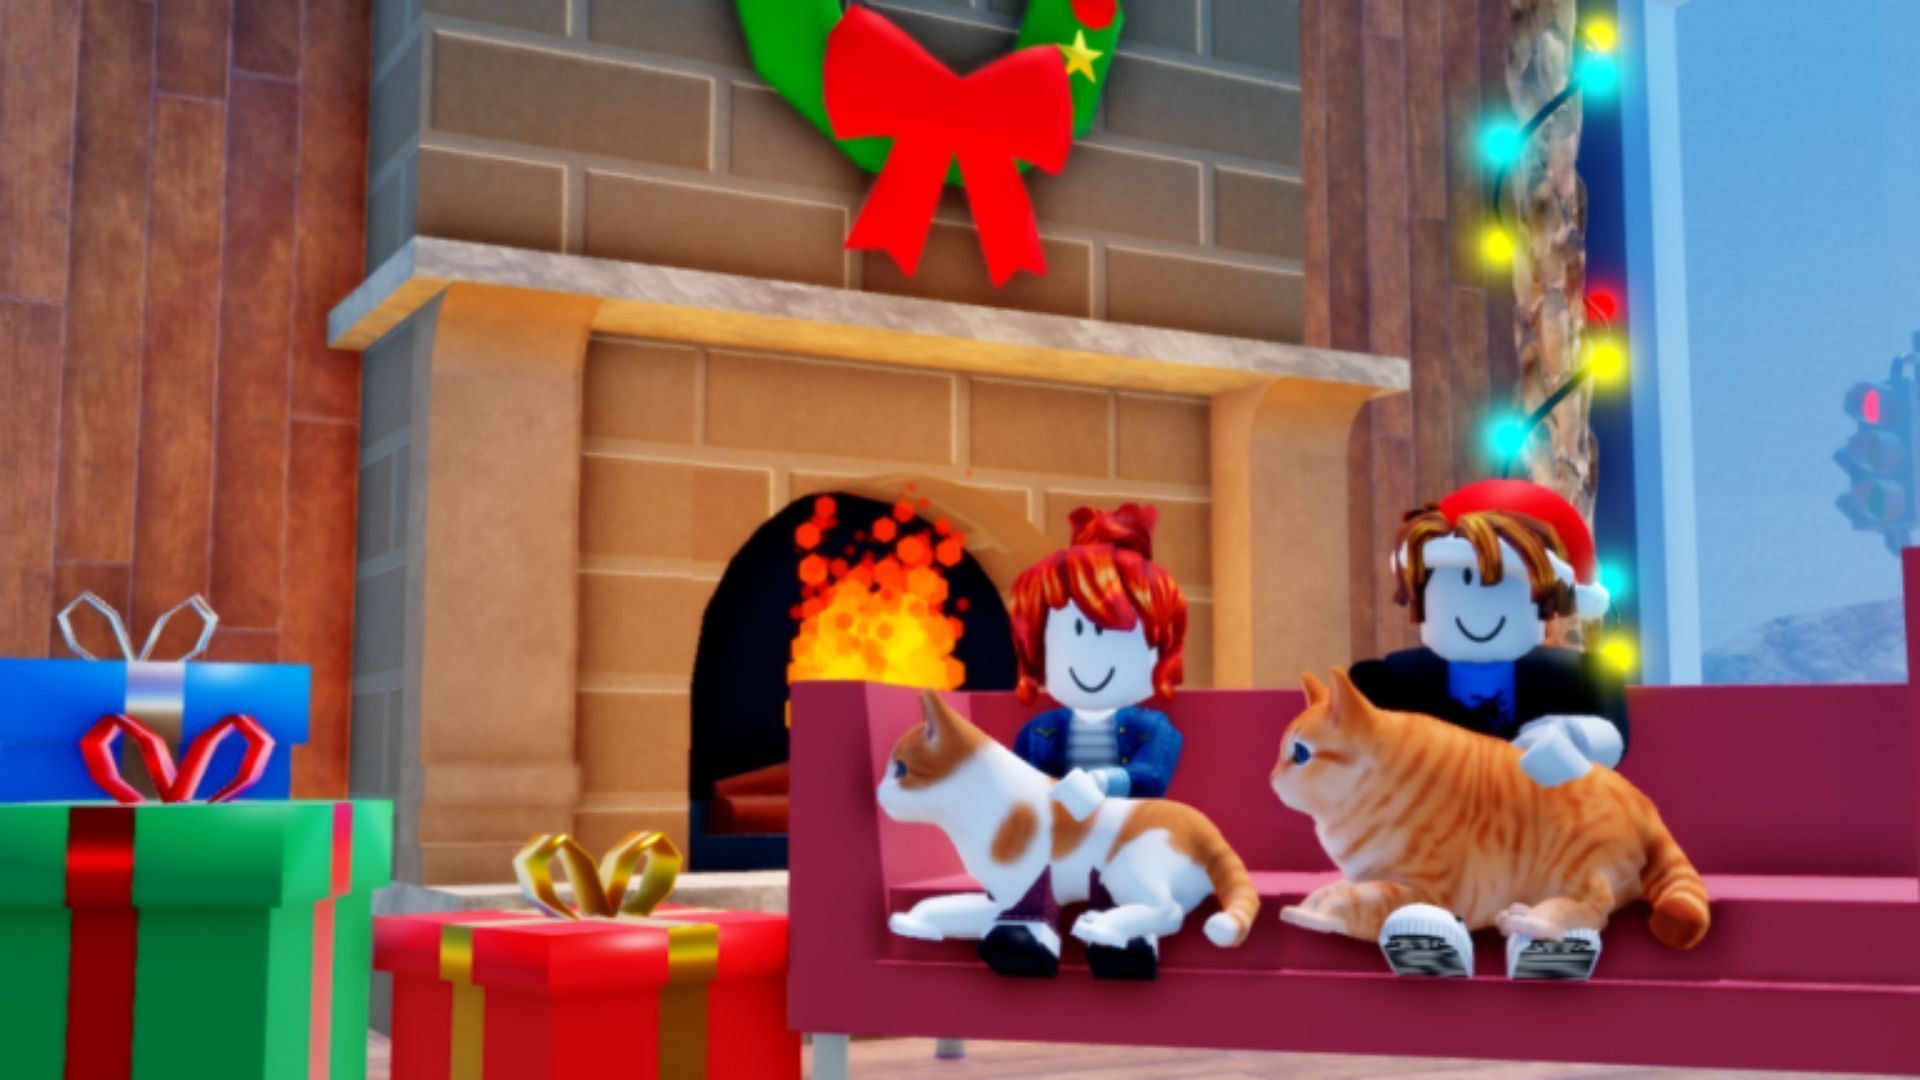 About Kitten Game (Image via Roblox)